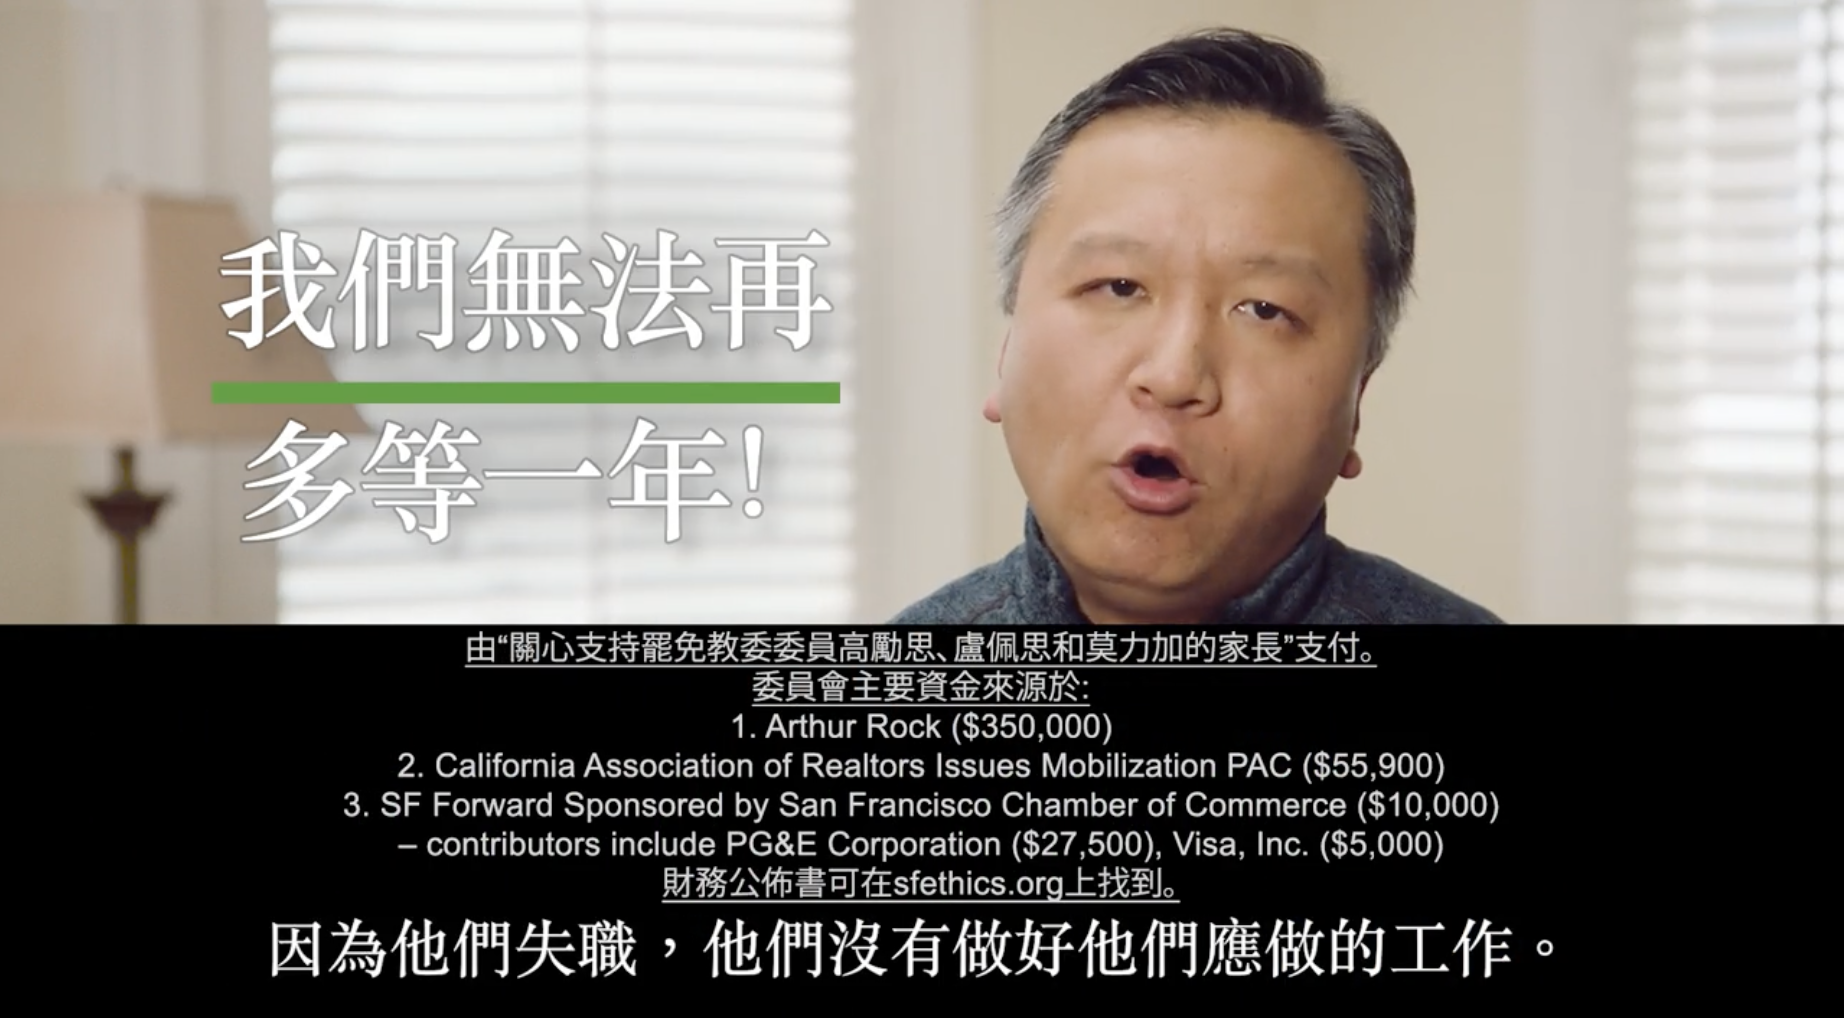 Screen grab of Kit Lam from a pro-recall video ad